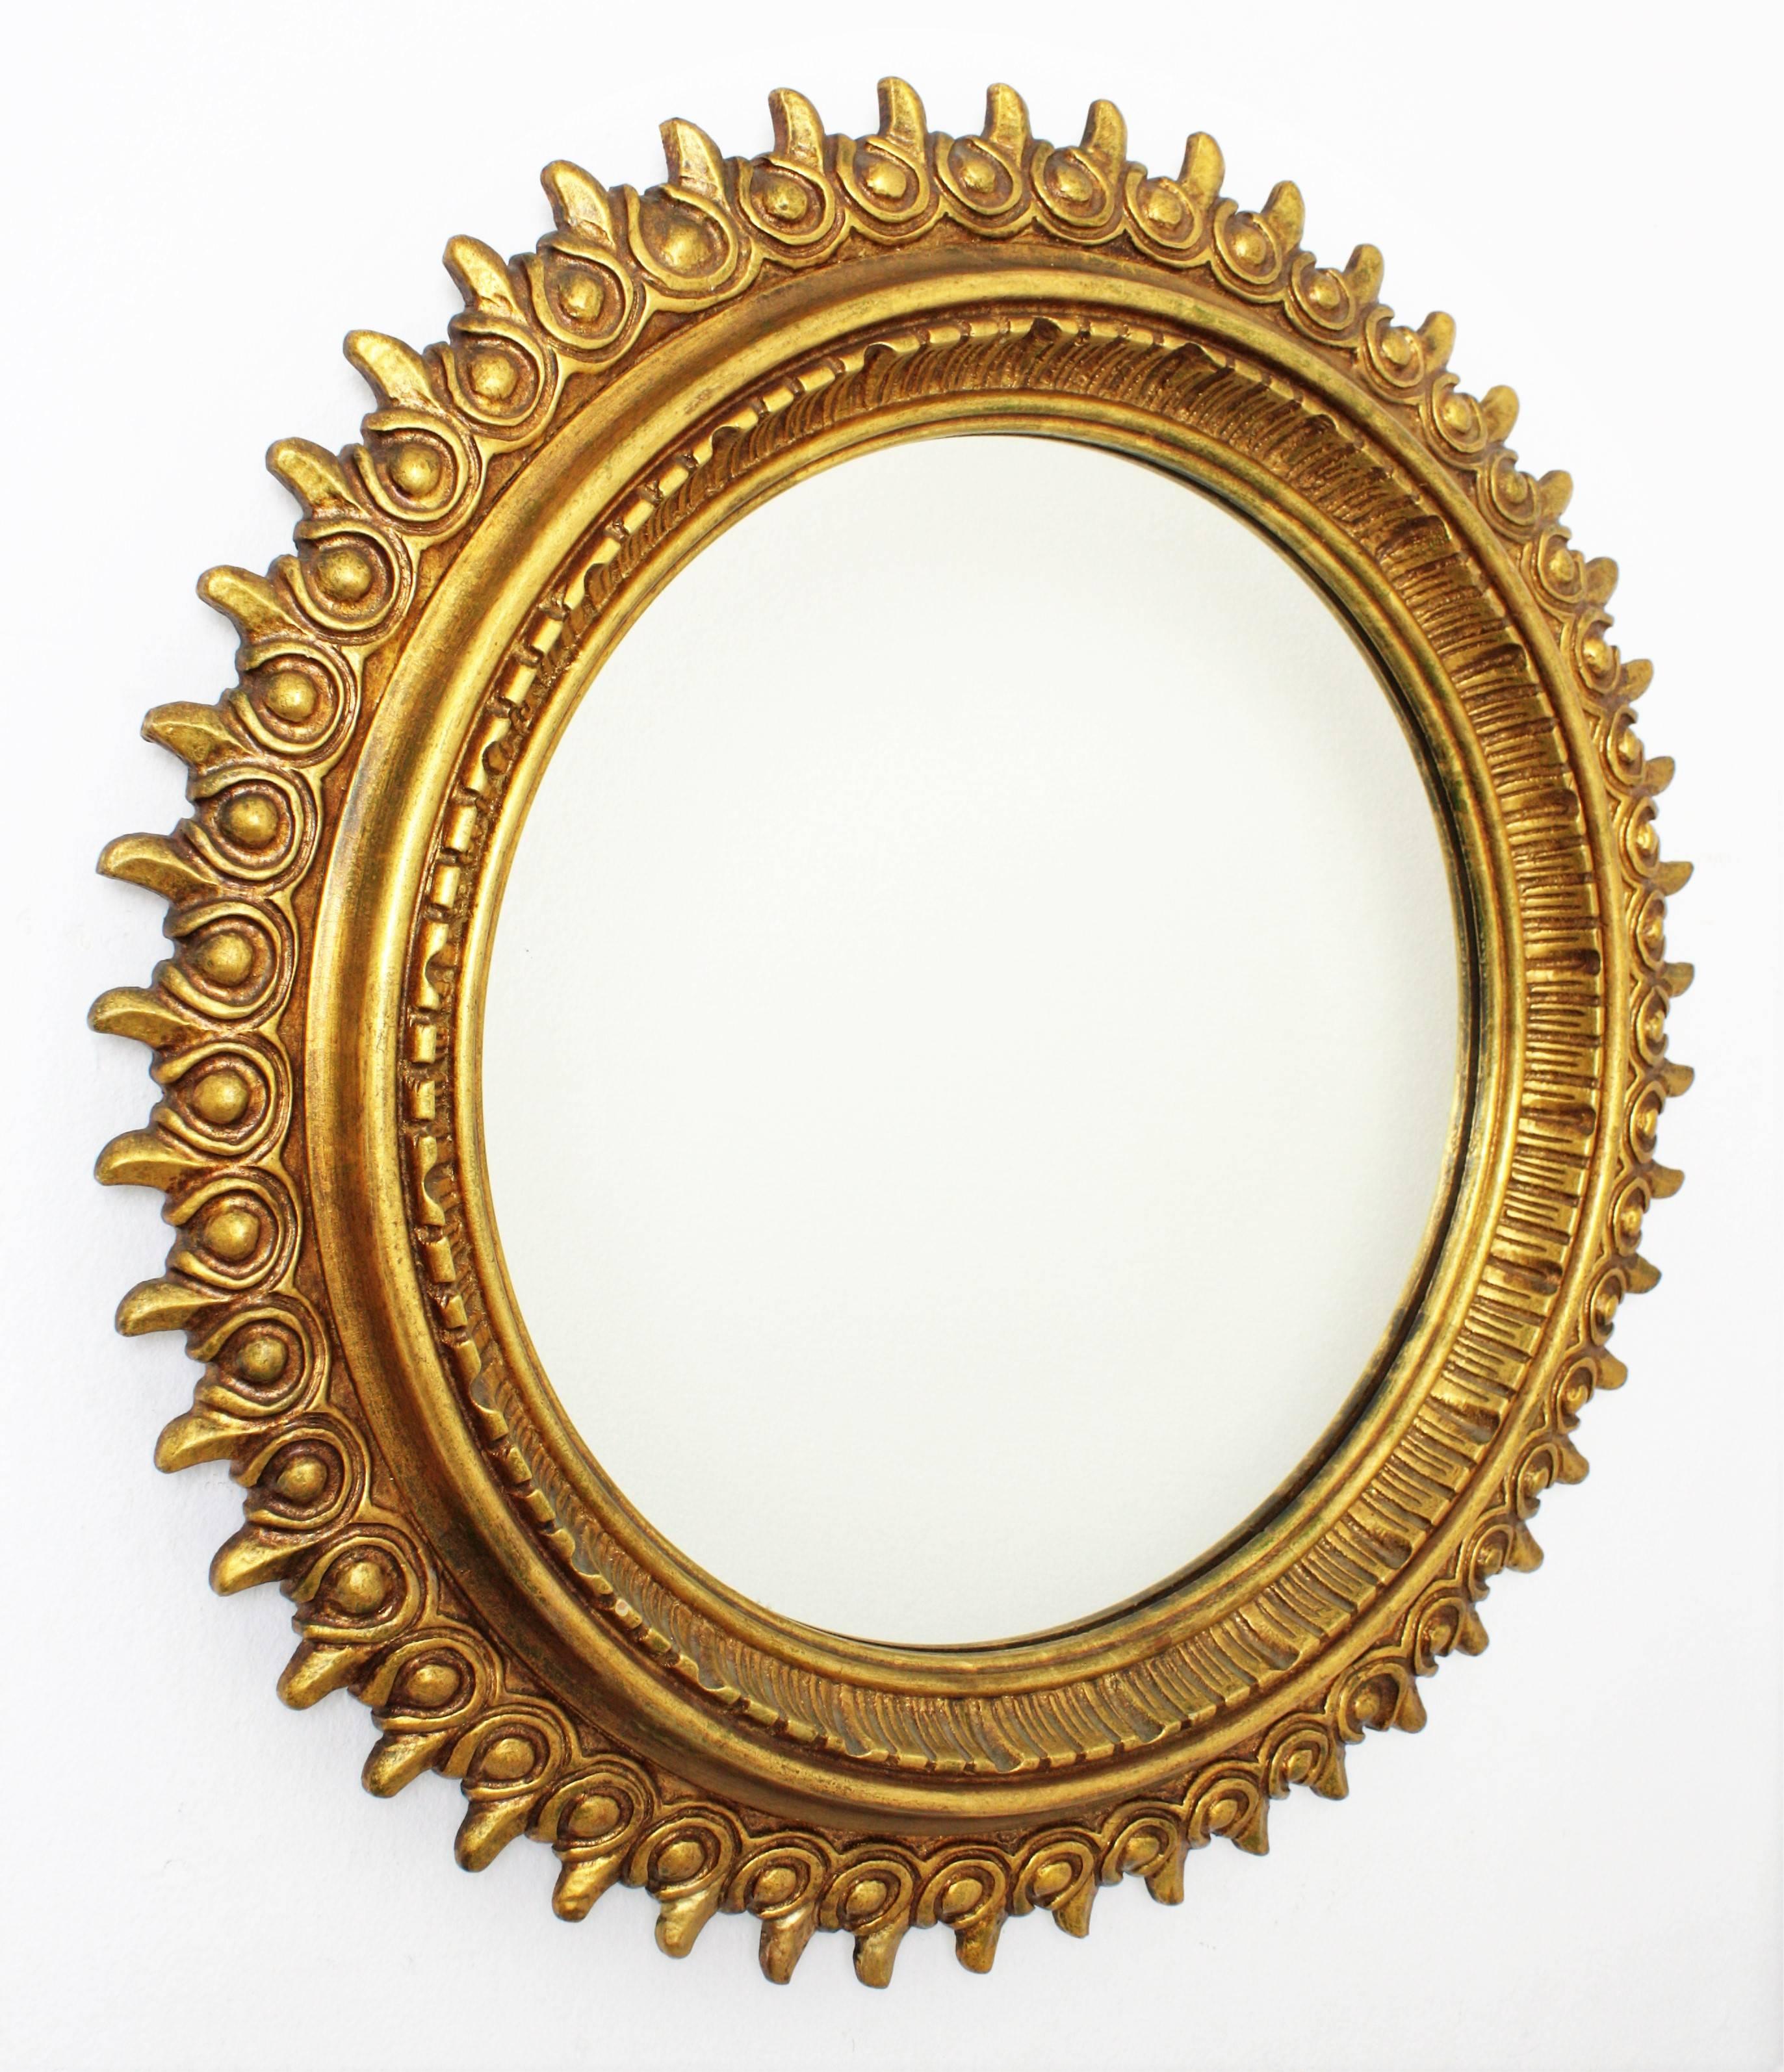 An amazing Francisco Hurtado carved and gilt sunburst mirror with gold leaf finish from the Hollywood Regency period. Francisco Hurtado was an Spanish cabinet maker and furniture maker highlighted manufacturing mirrors. The beautiful carved pattern